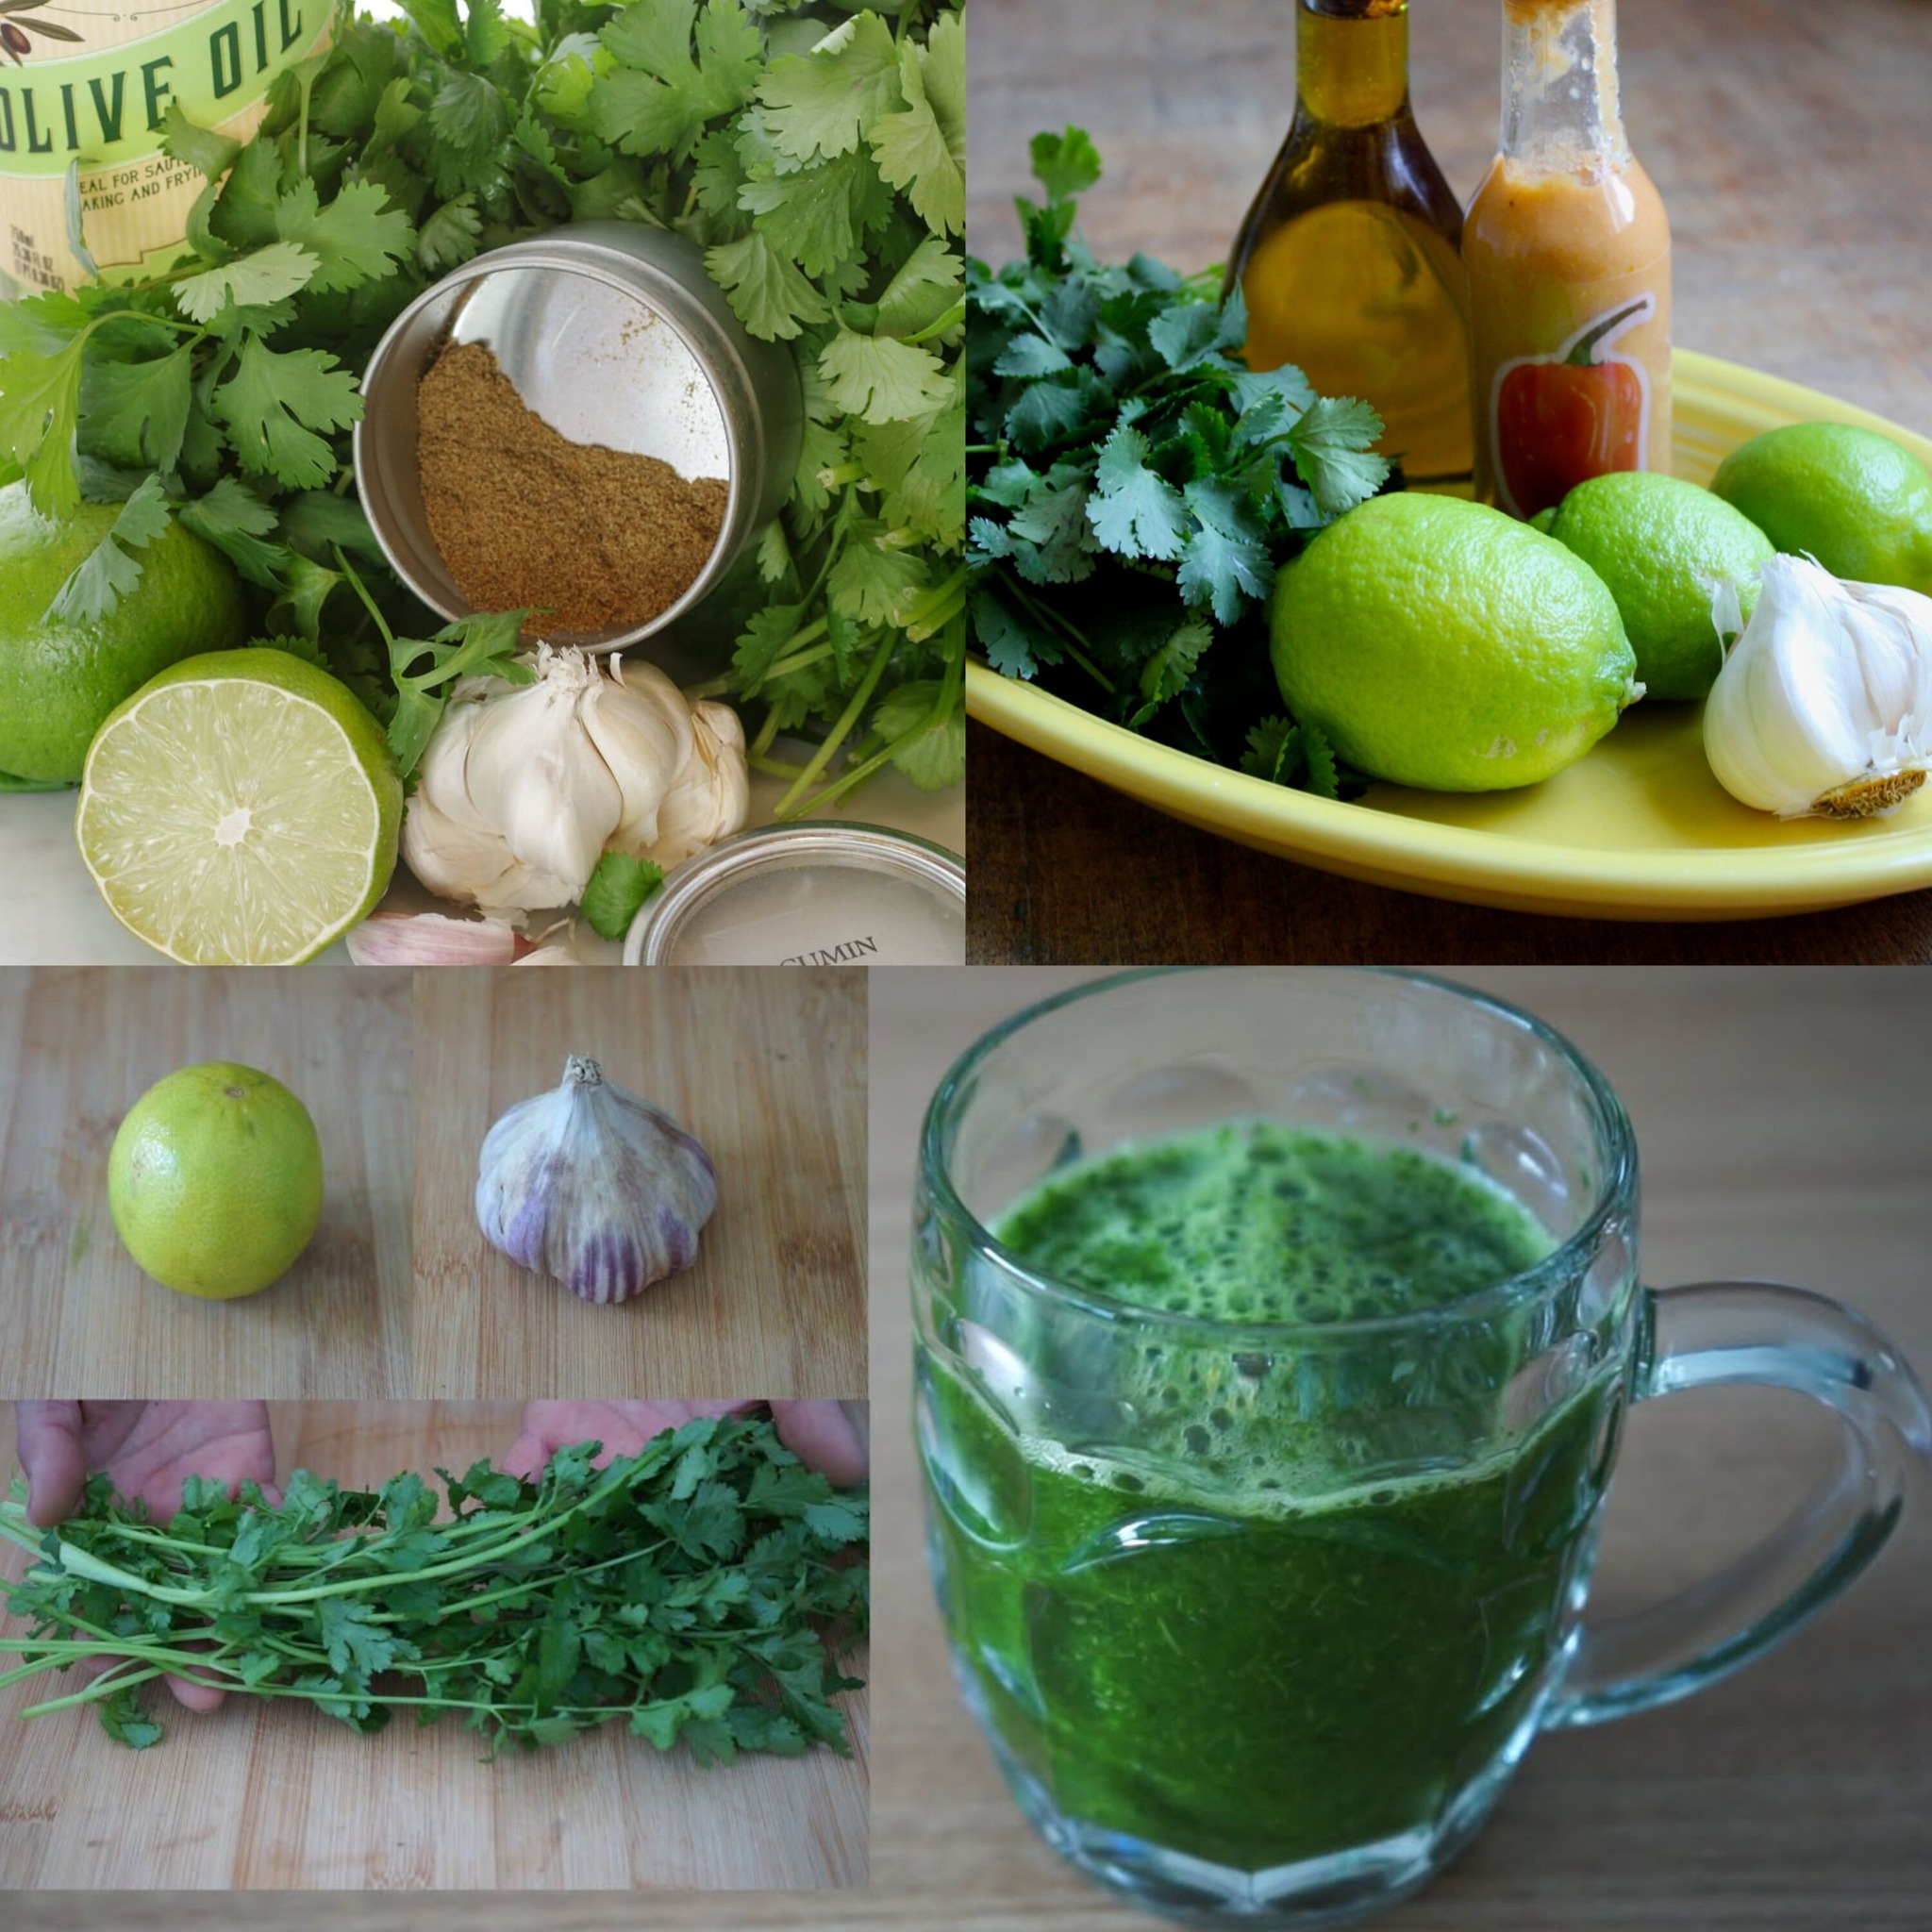 Rejuvenate Your Liver and Veins in 3 Days